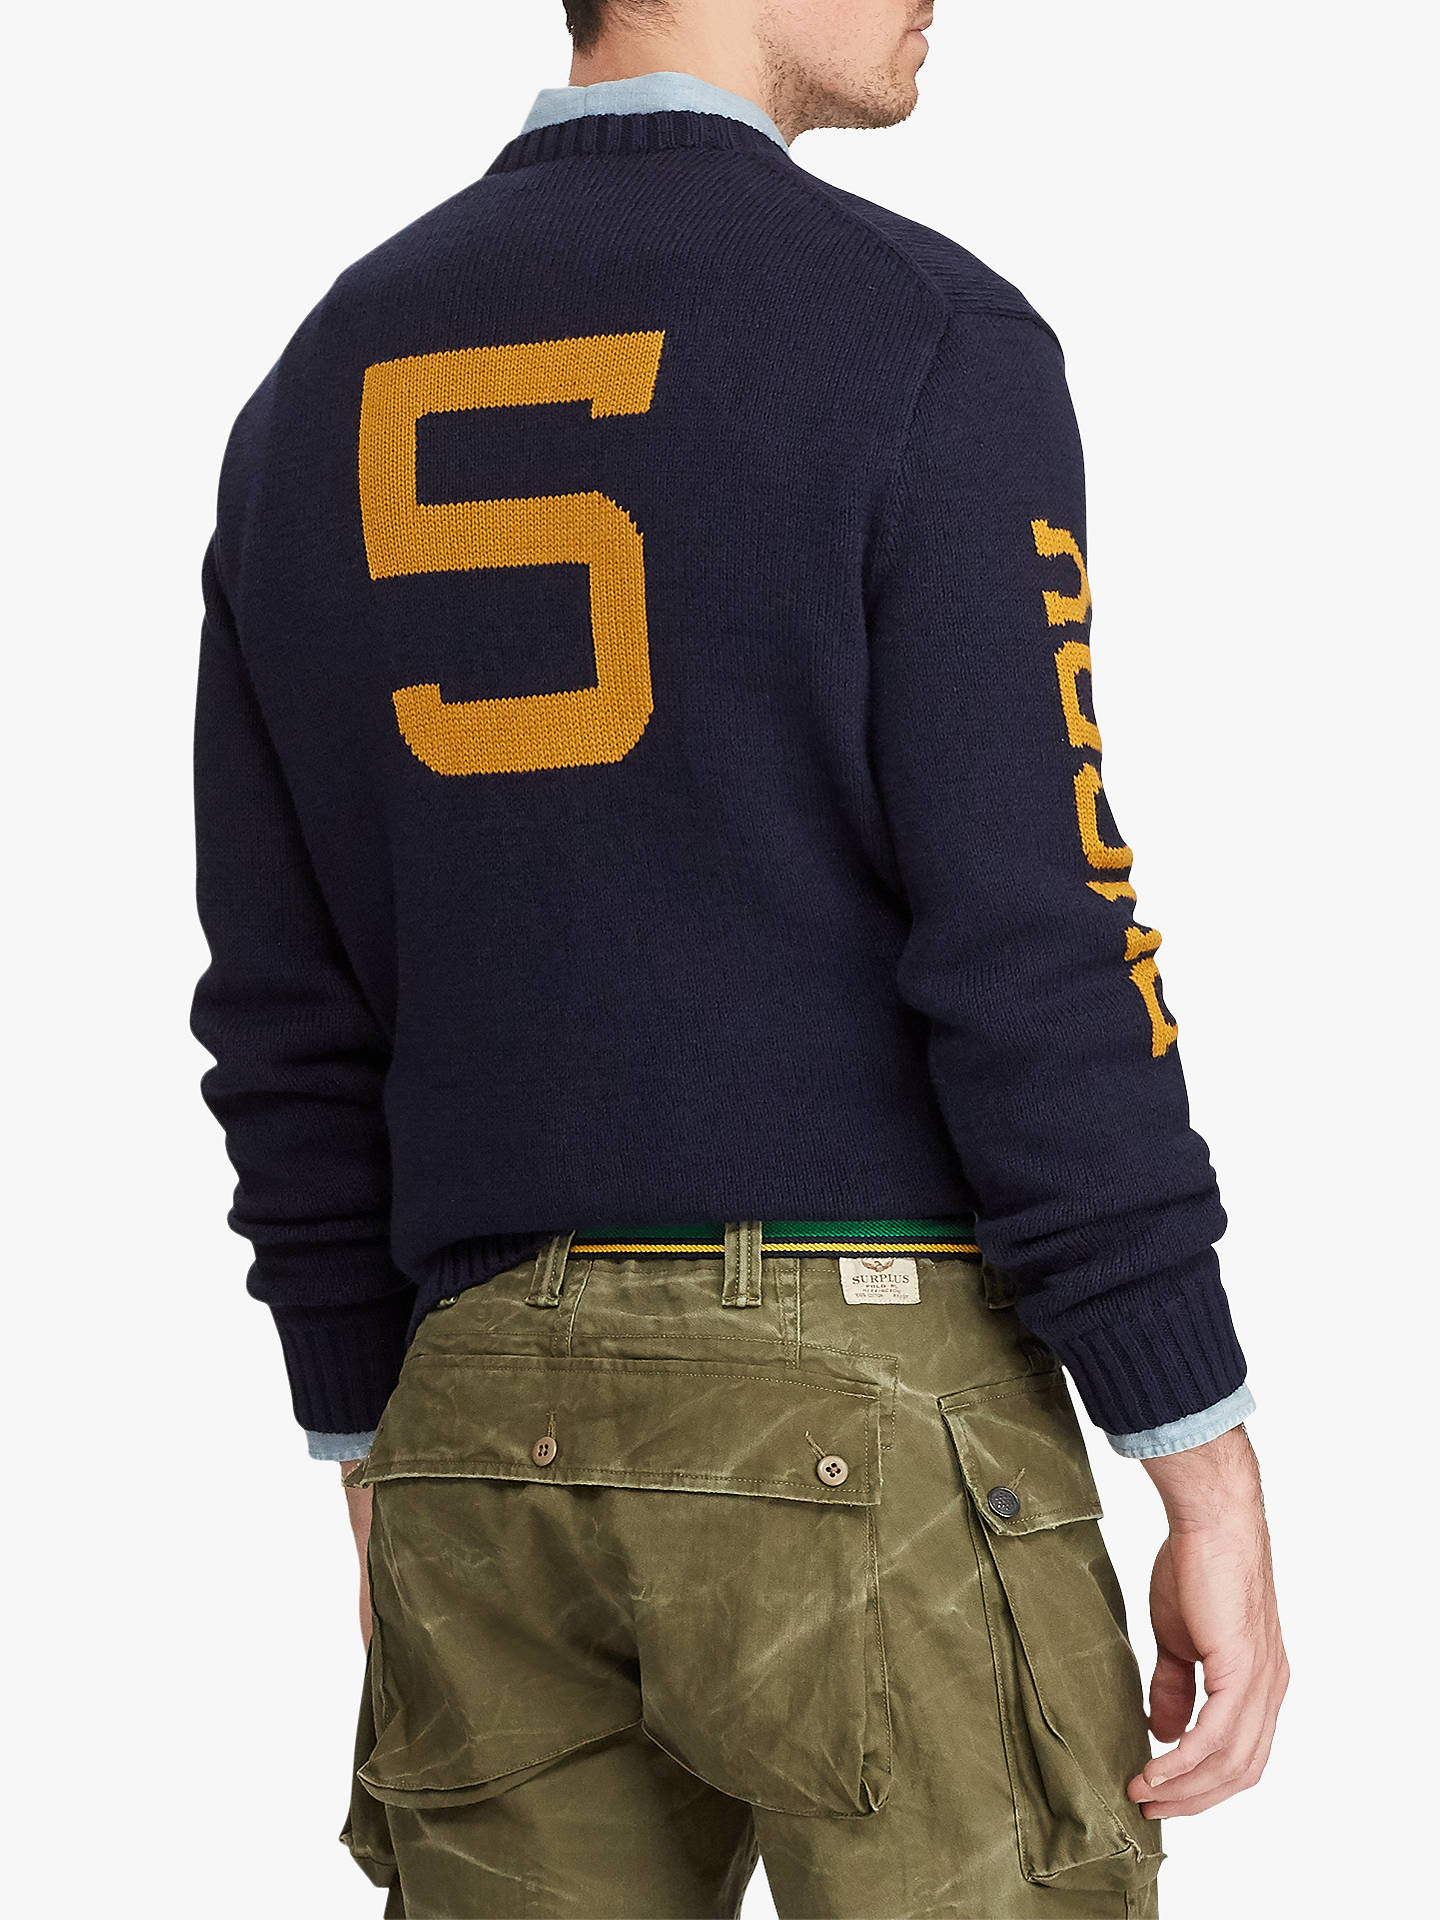 Polo Ralph Lauren Rugby Bear Sweater, Navy at John Lewis & Partners